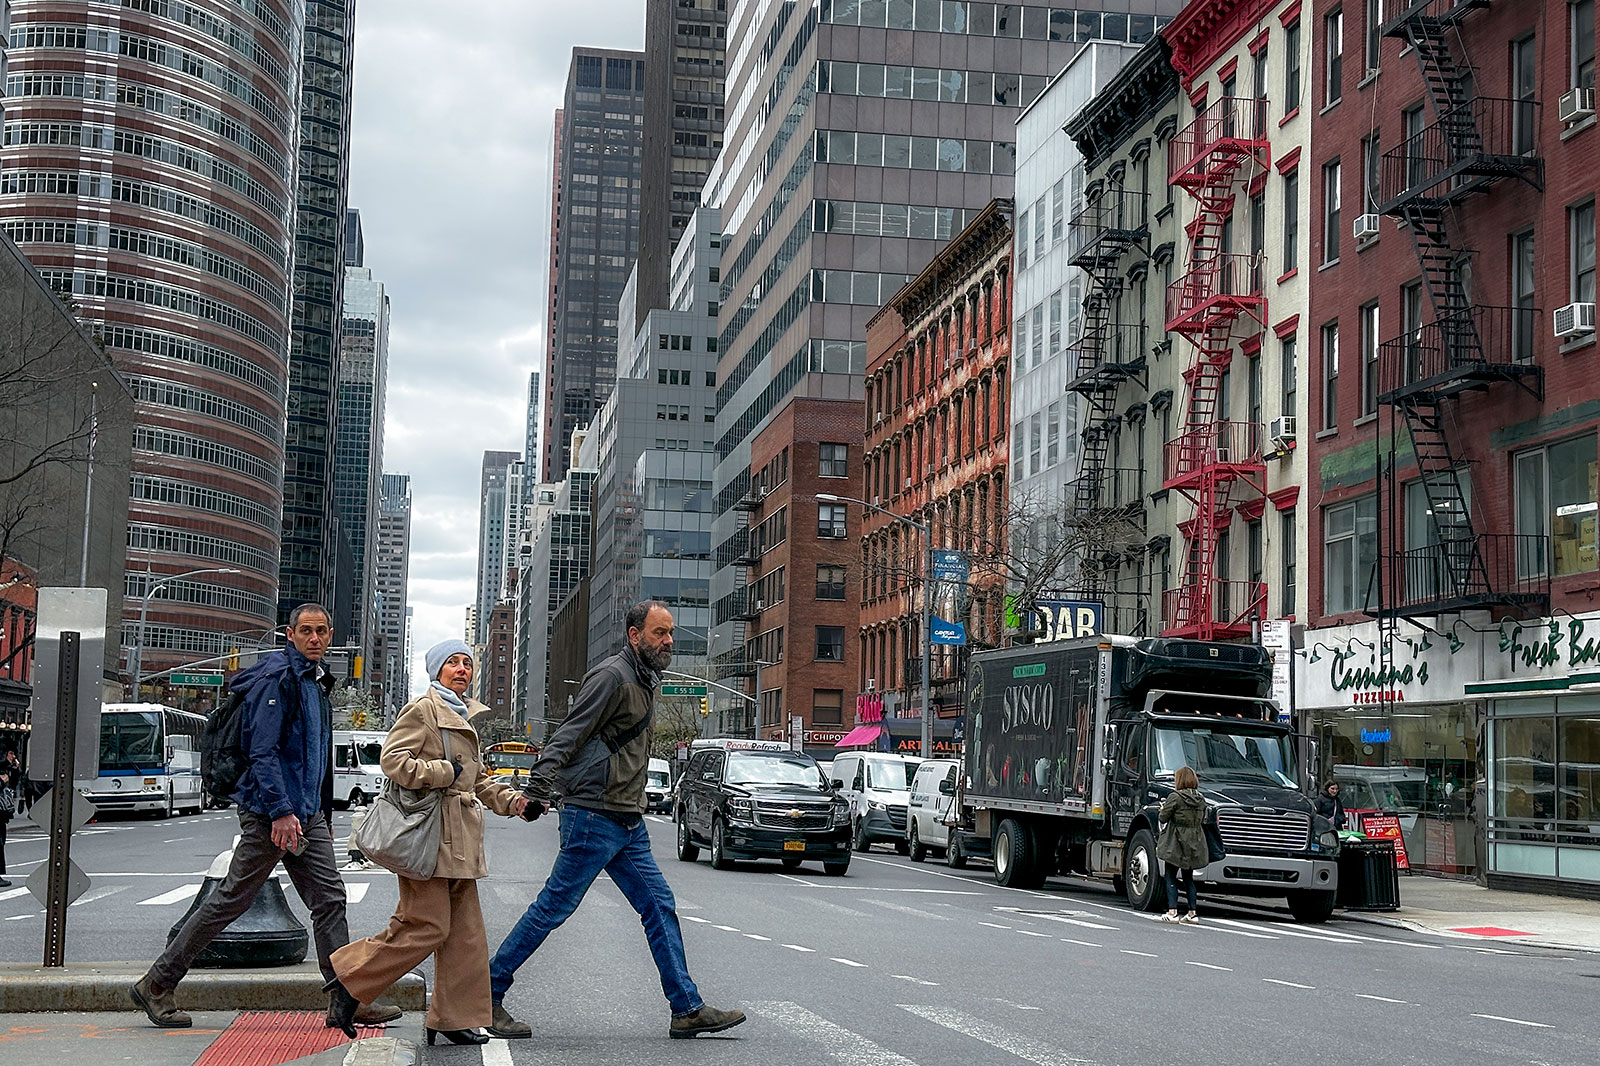 Pedestrians pass along 56th Street in New York after an earthquake on Friday.